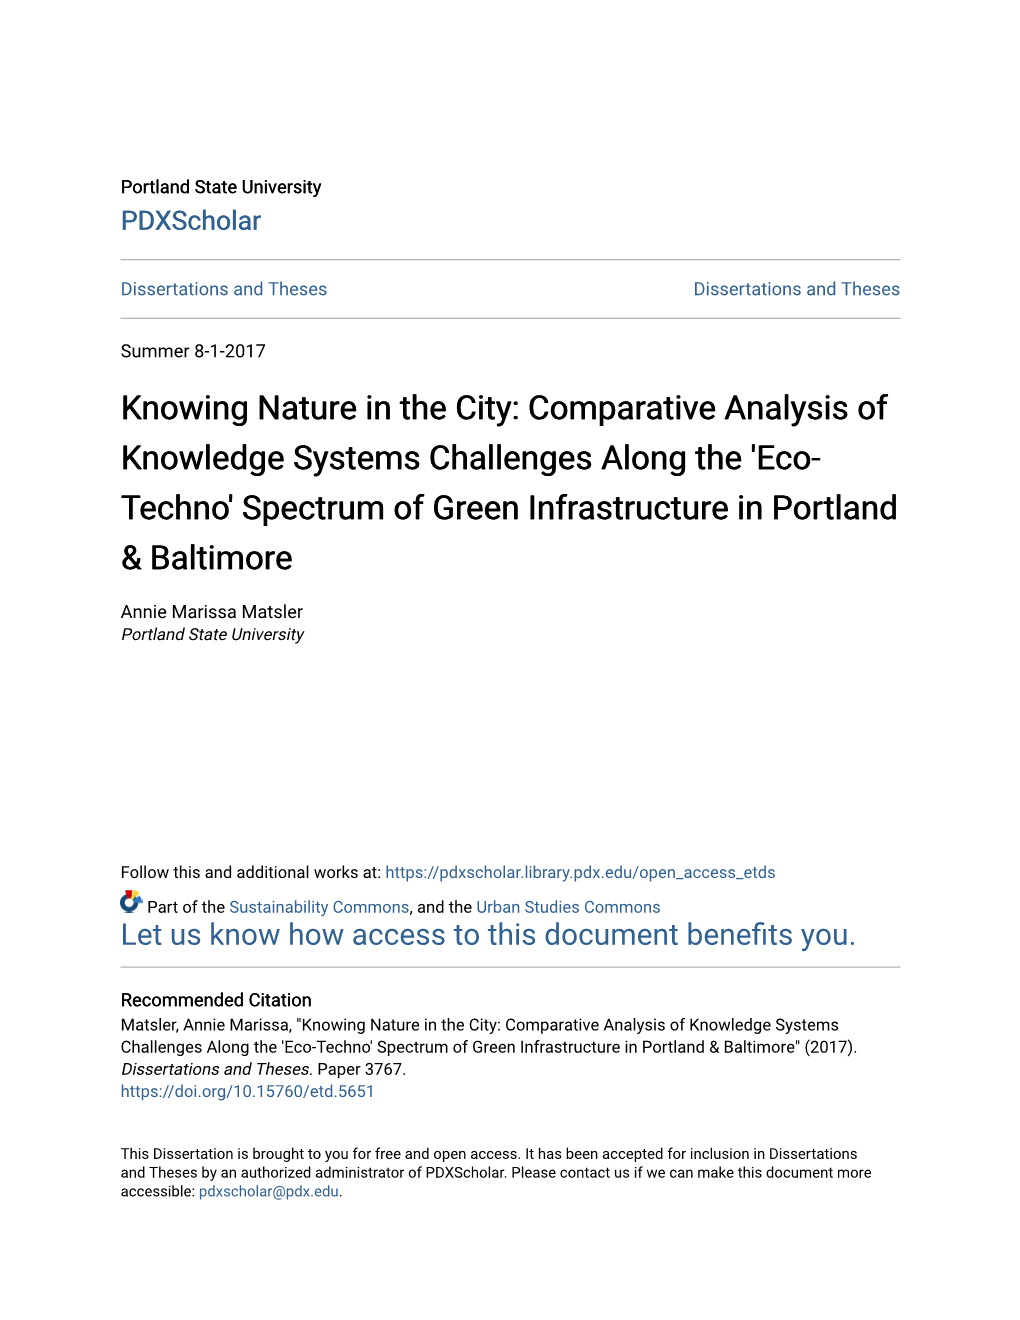 Knowing Nature in the City: Comparative Analysis of Knowledge Systems Challenges Along the 'Eco-Techno' Spectrum of Gree